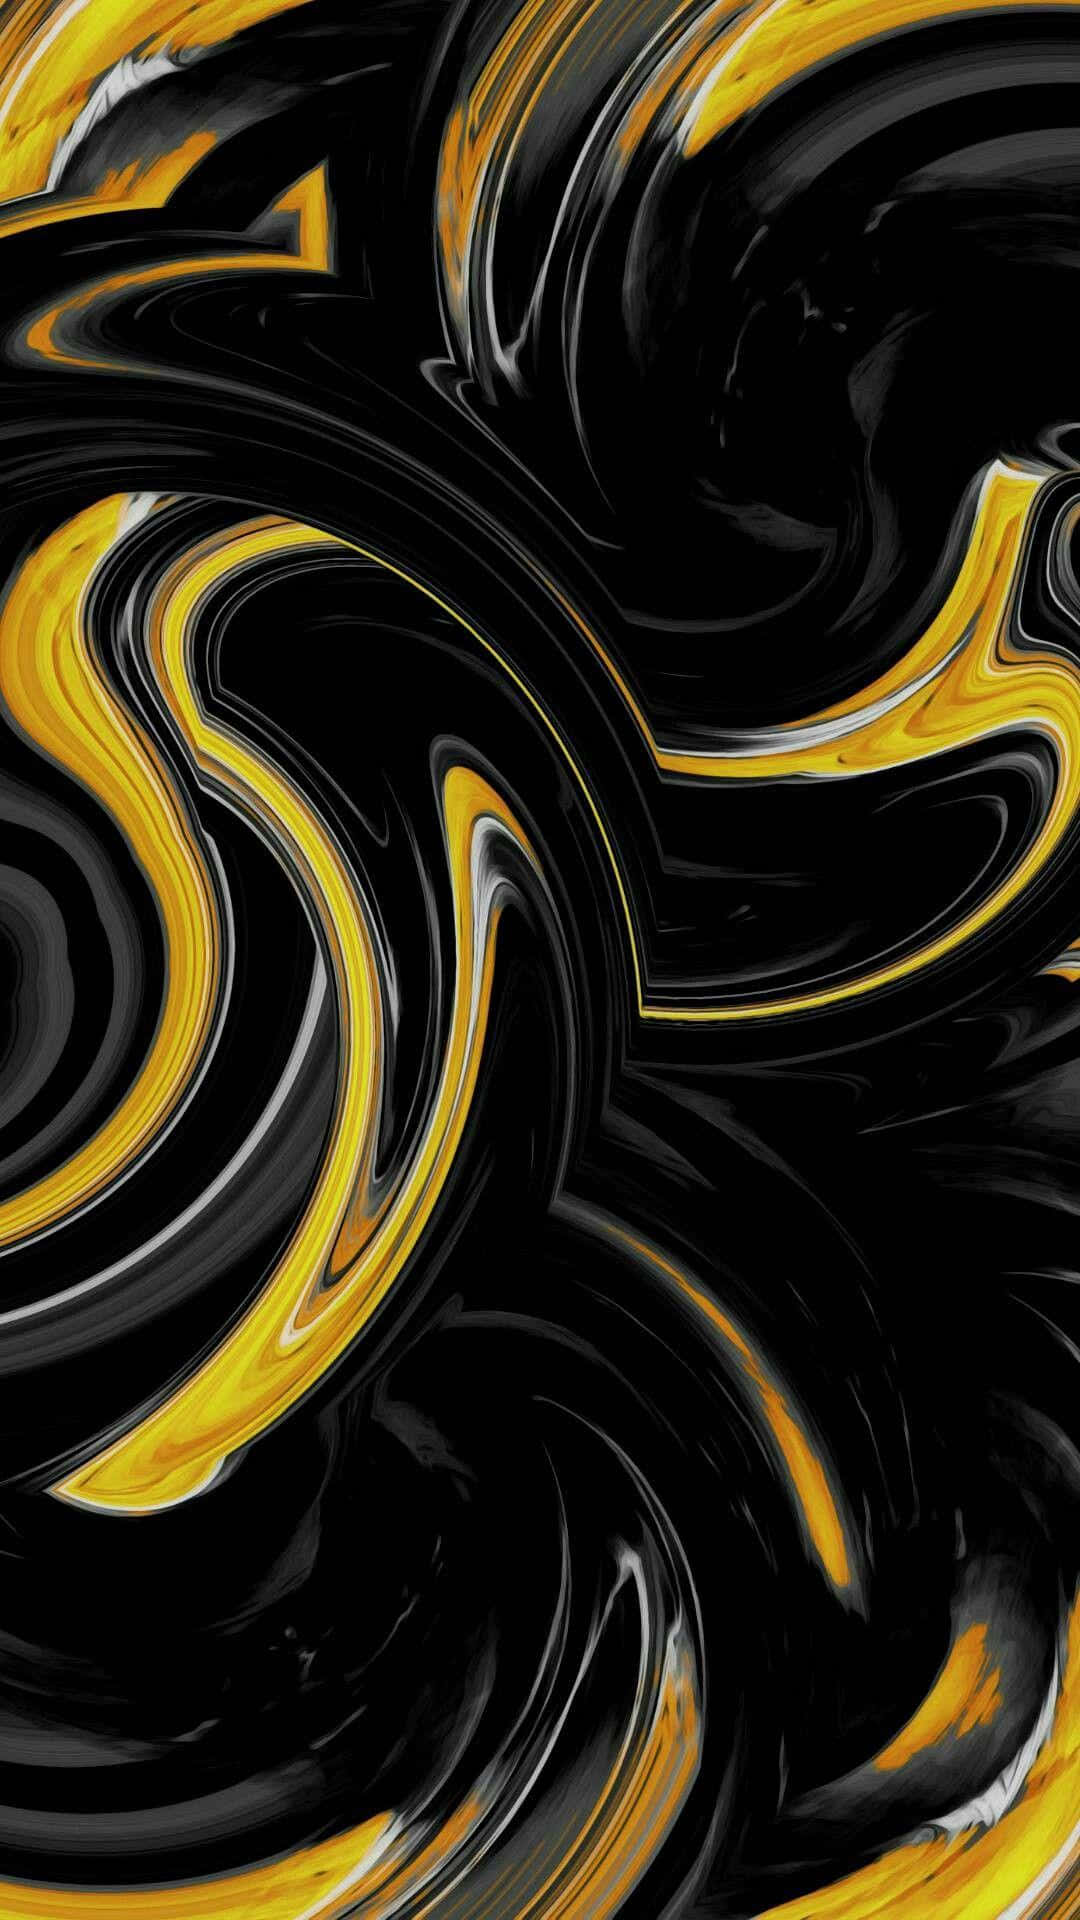 Bold Yellow and Black Abstract Design